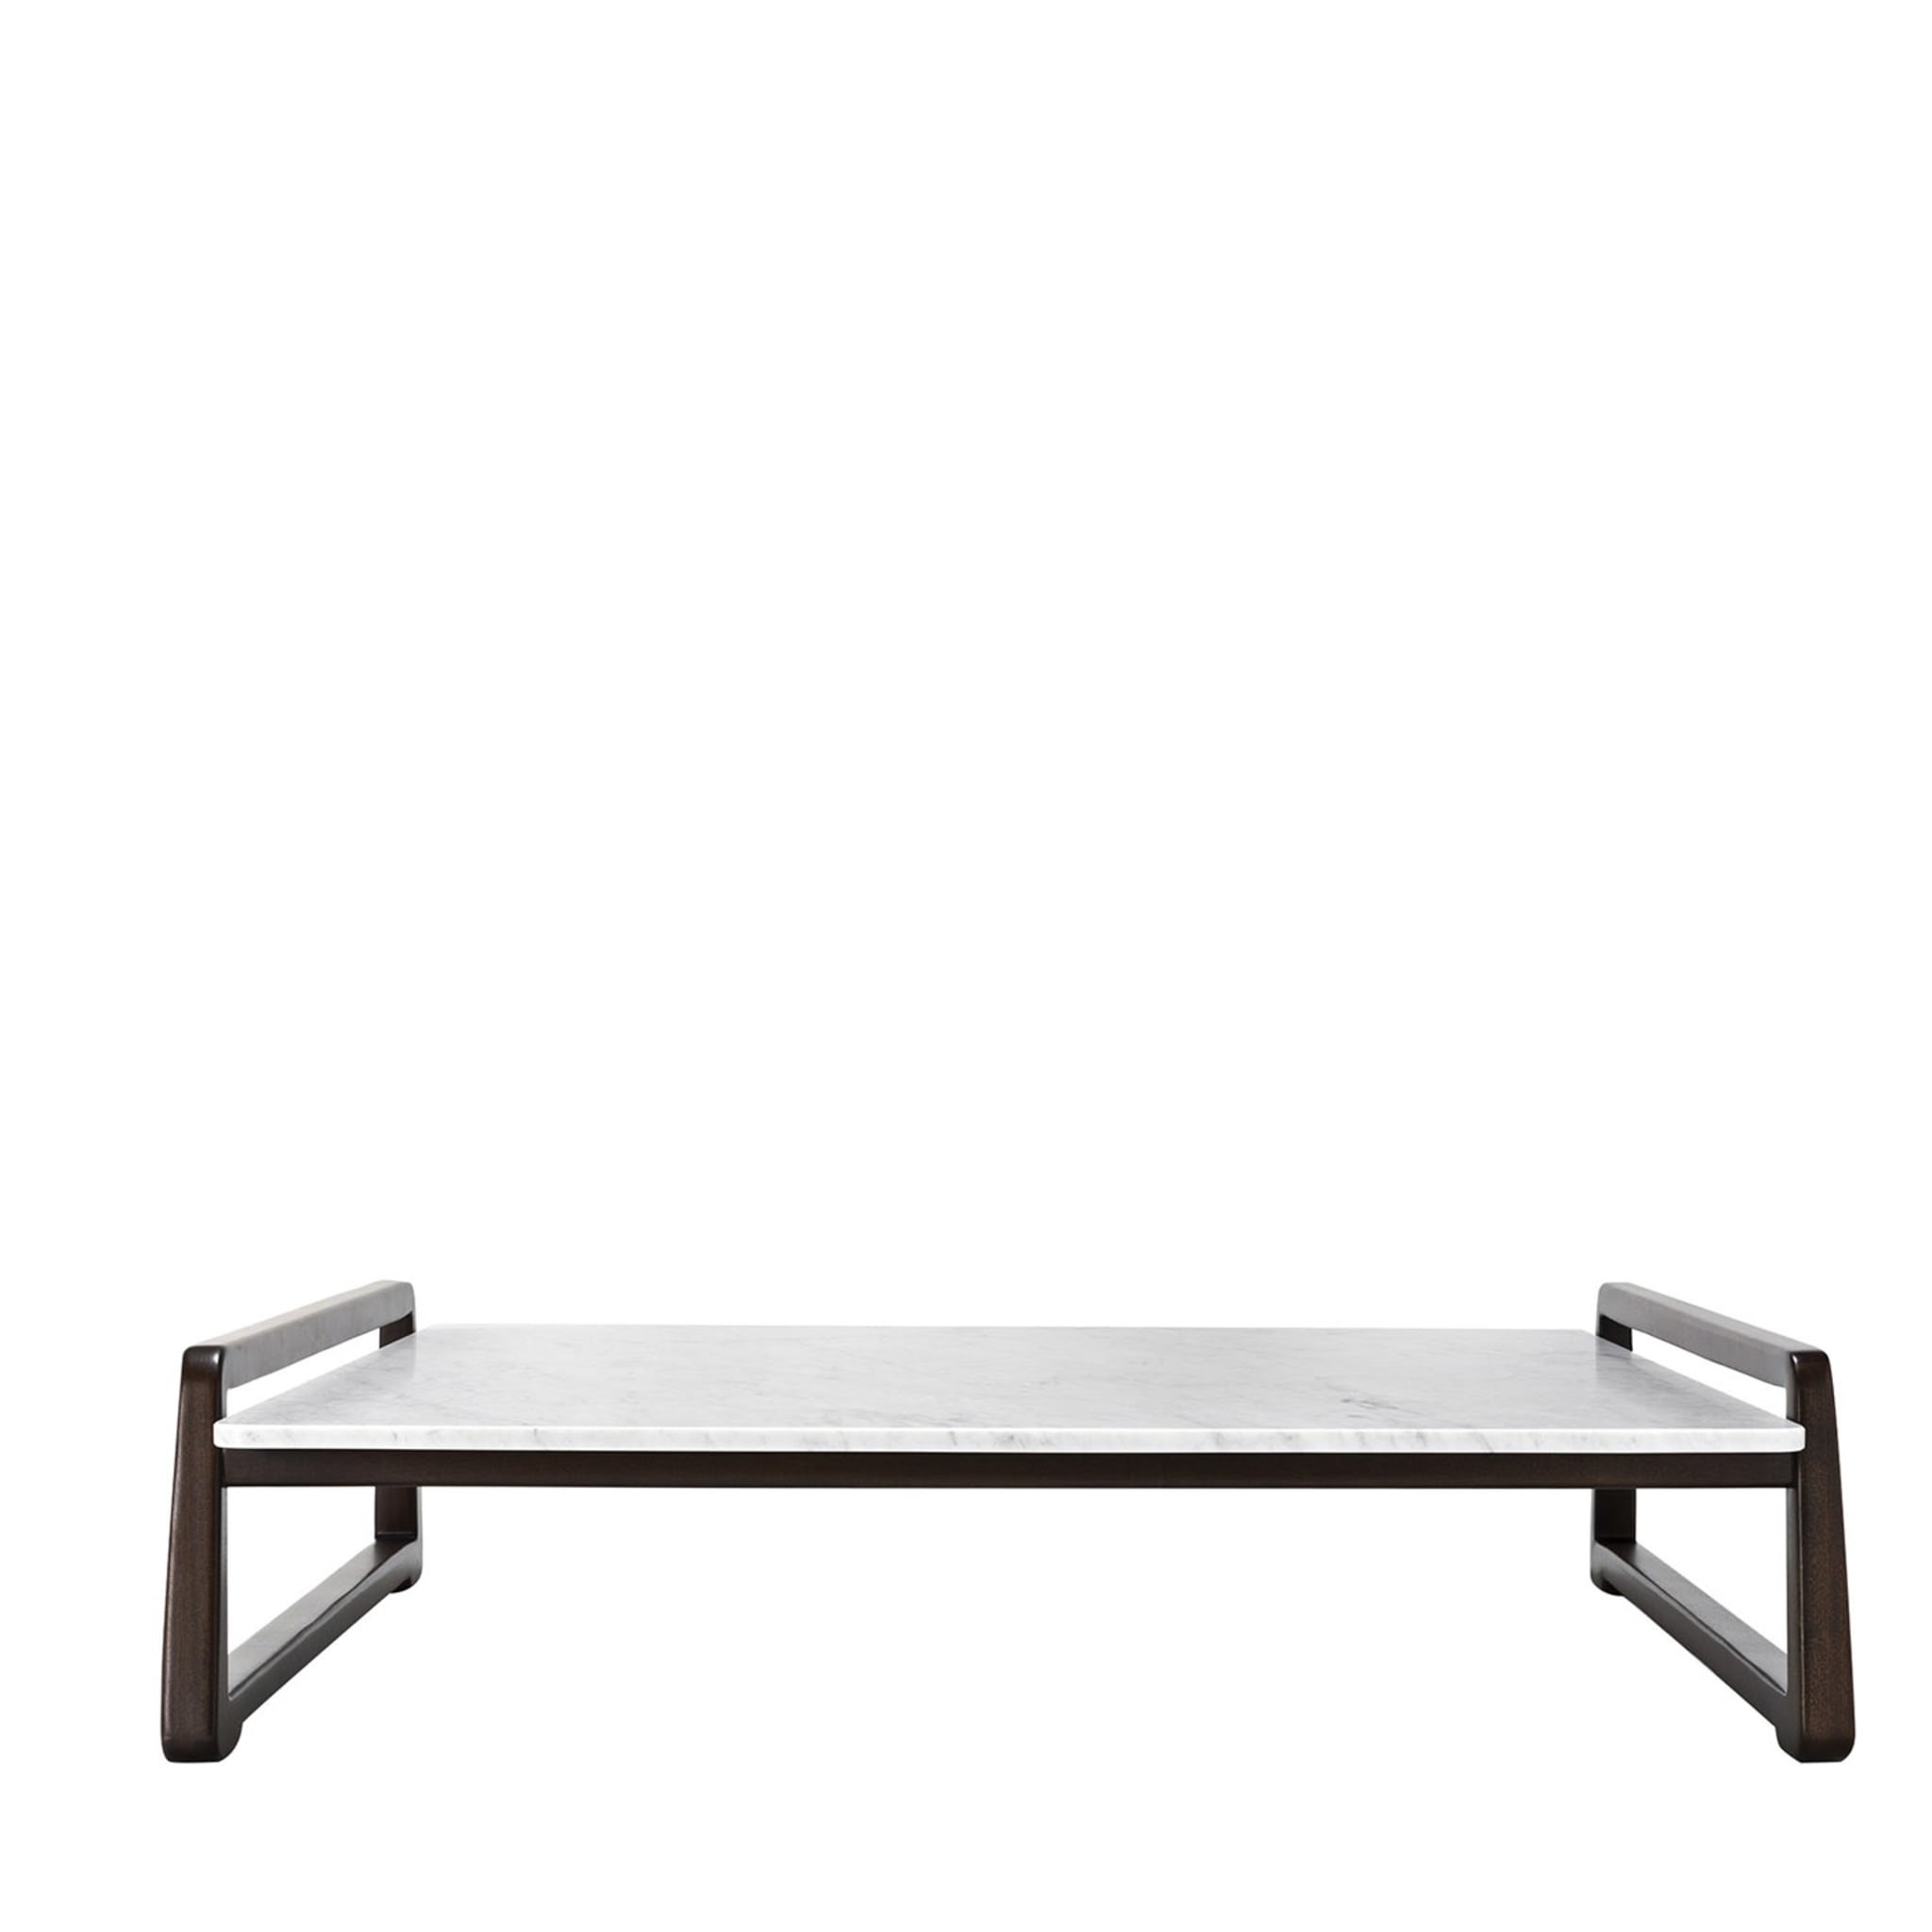 Sunset Barrique + Carrara Coffee Table by Paola Navone - Main view